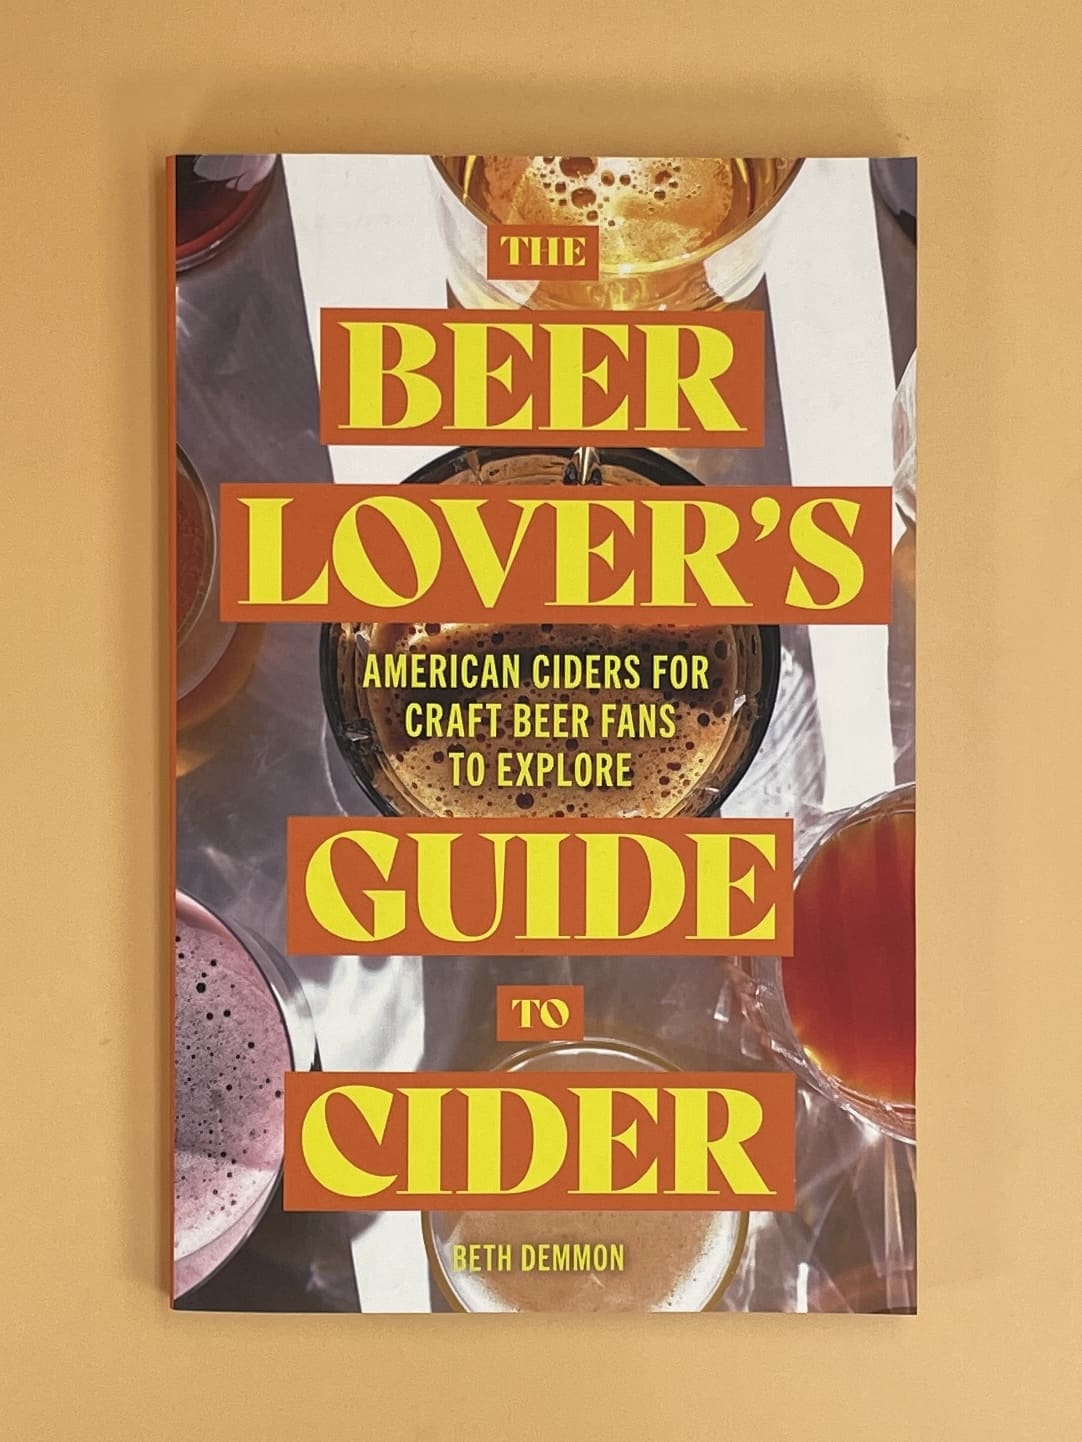 The Beer Lover's Guide to Cider: American Ciders for Craft Beer Fans to Explore (Beth Demmon)